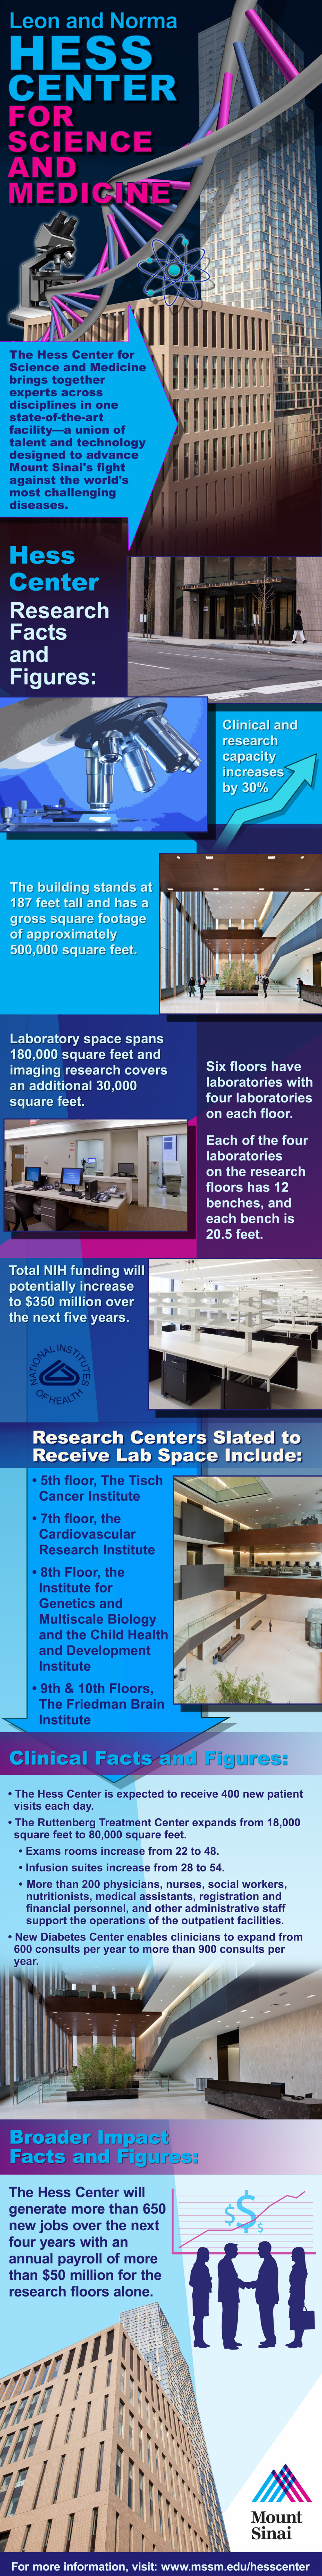 Facts about the Leon and Norma Hess Center for Science and Medicine Infographic